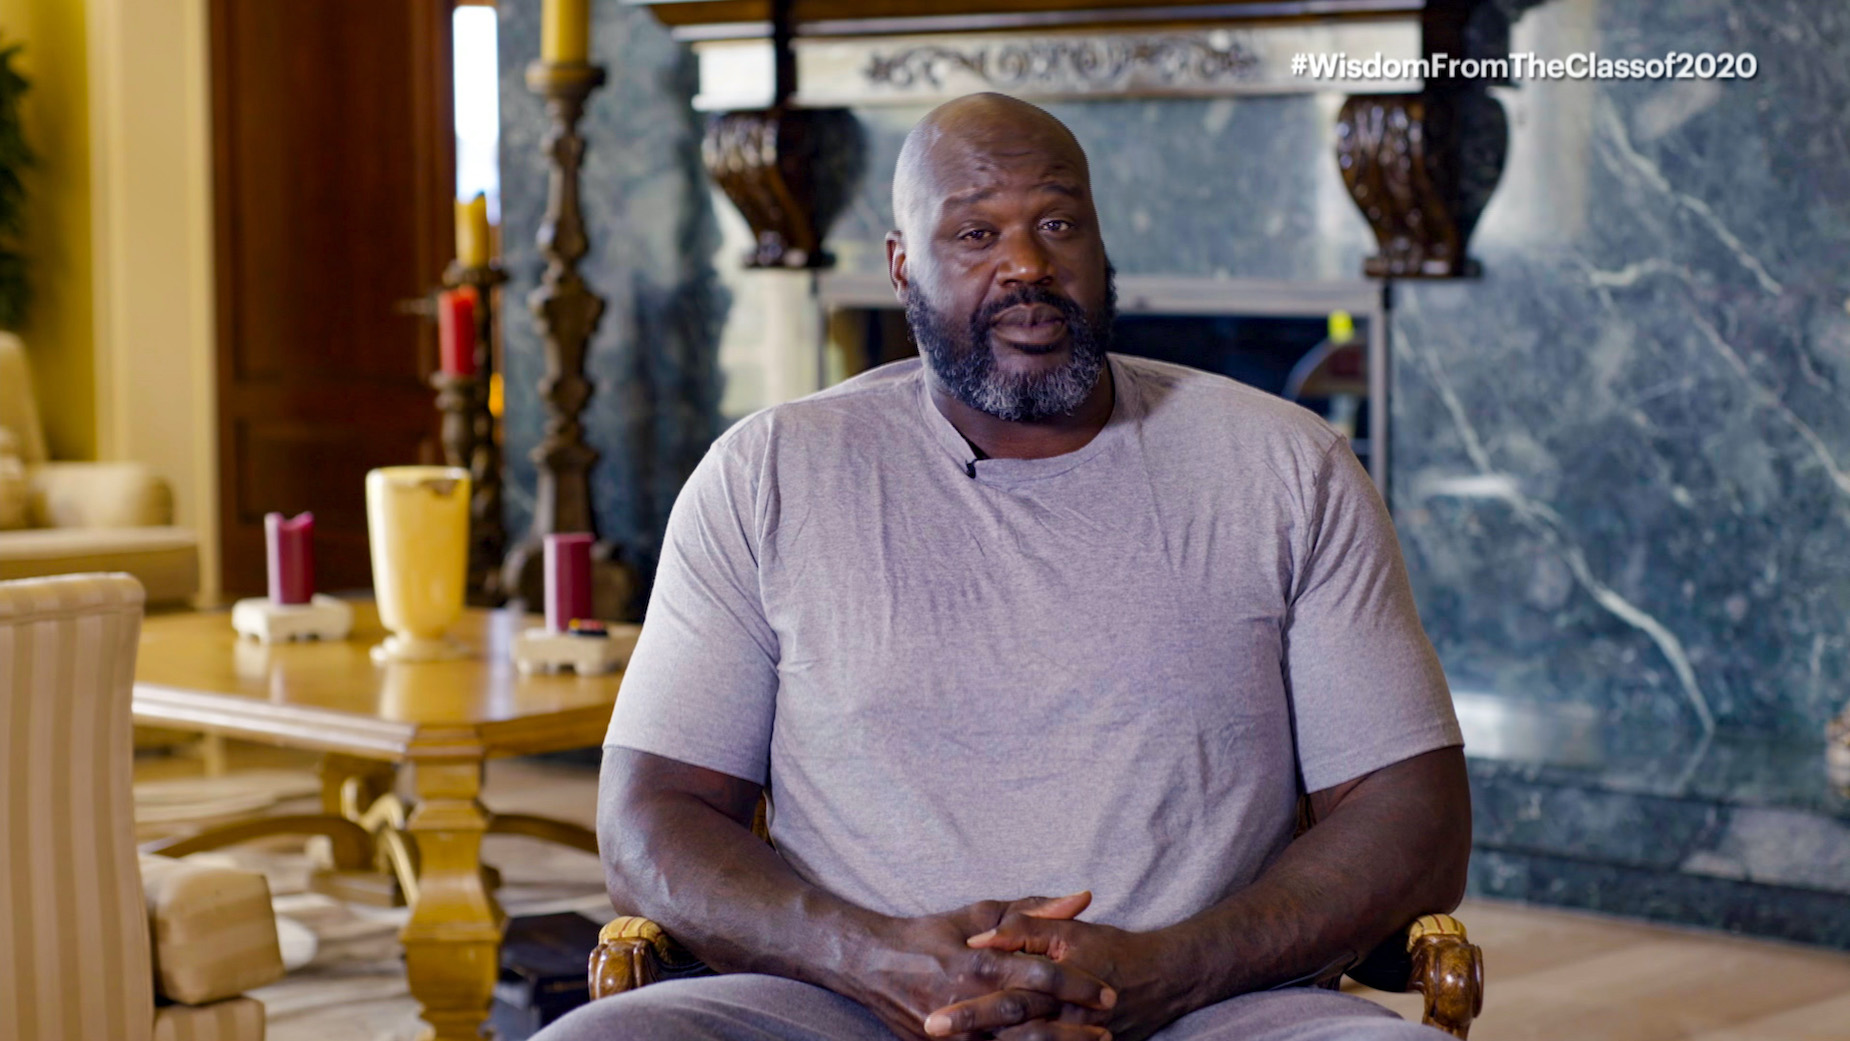 Shaquille O’Neal Once Made ‘the Biggest Purchase in Walmart History,’ Spending $70,000 After Midnight